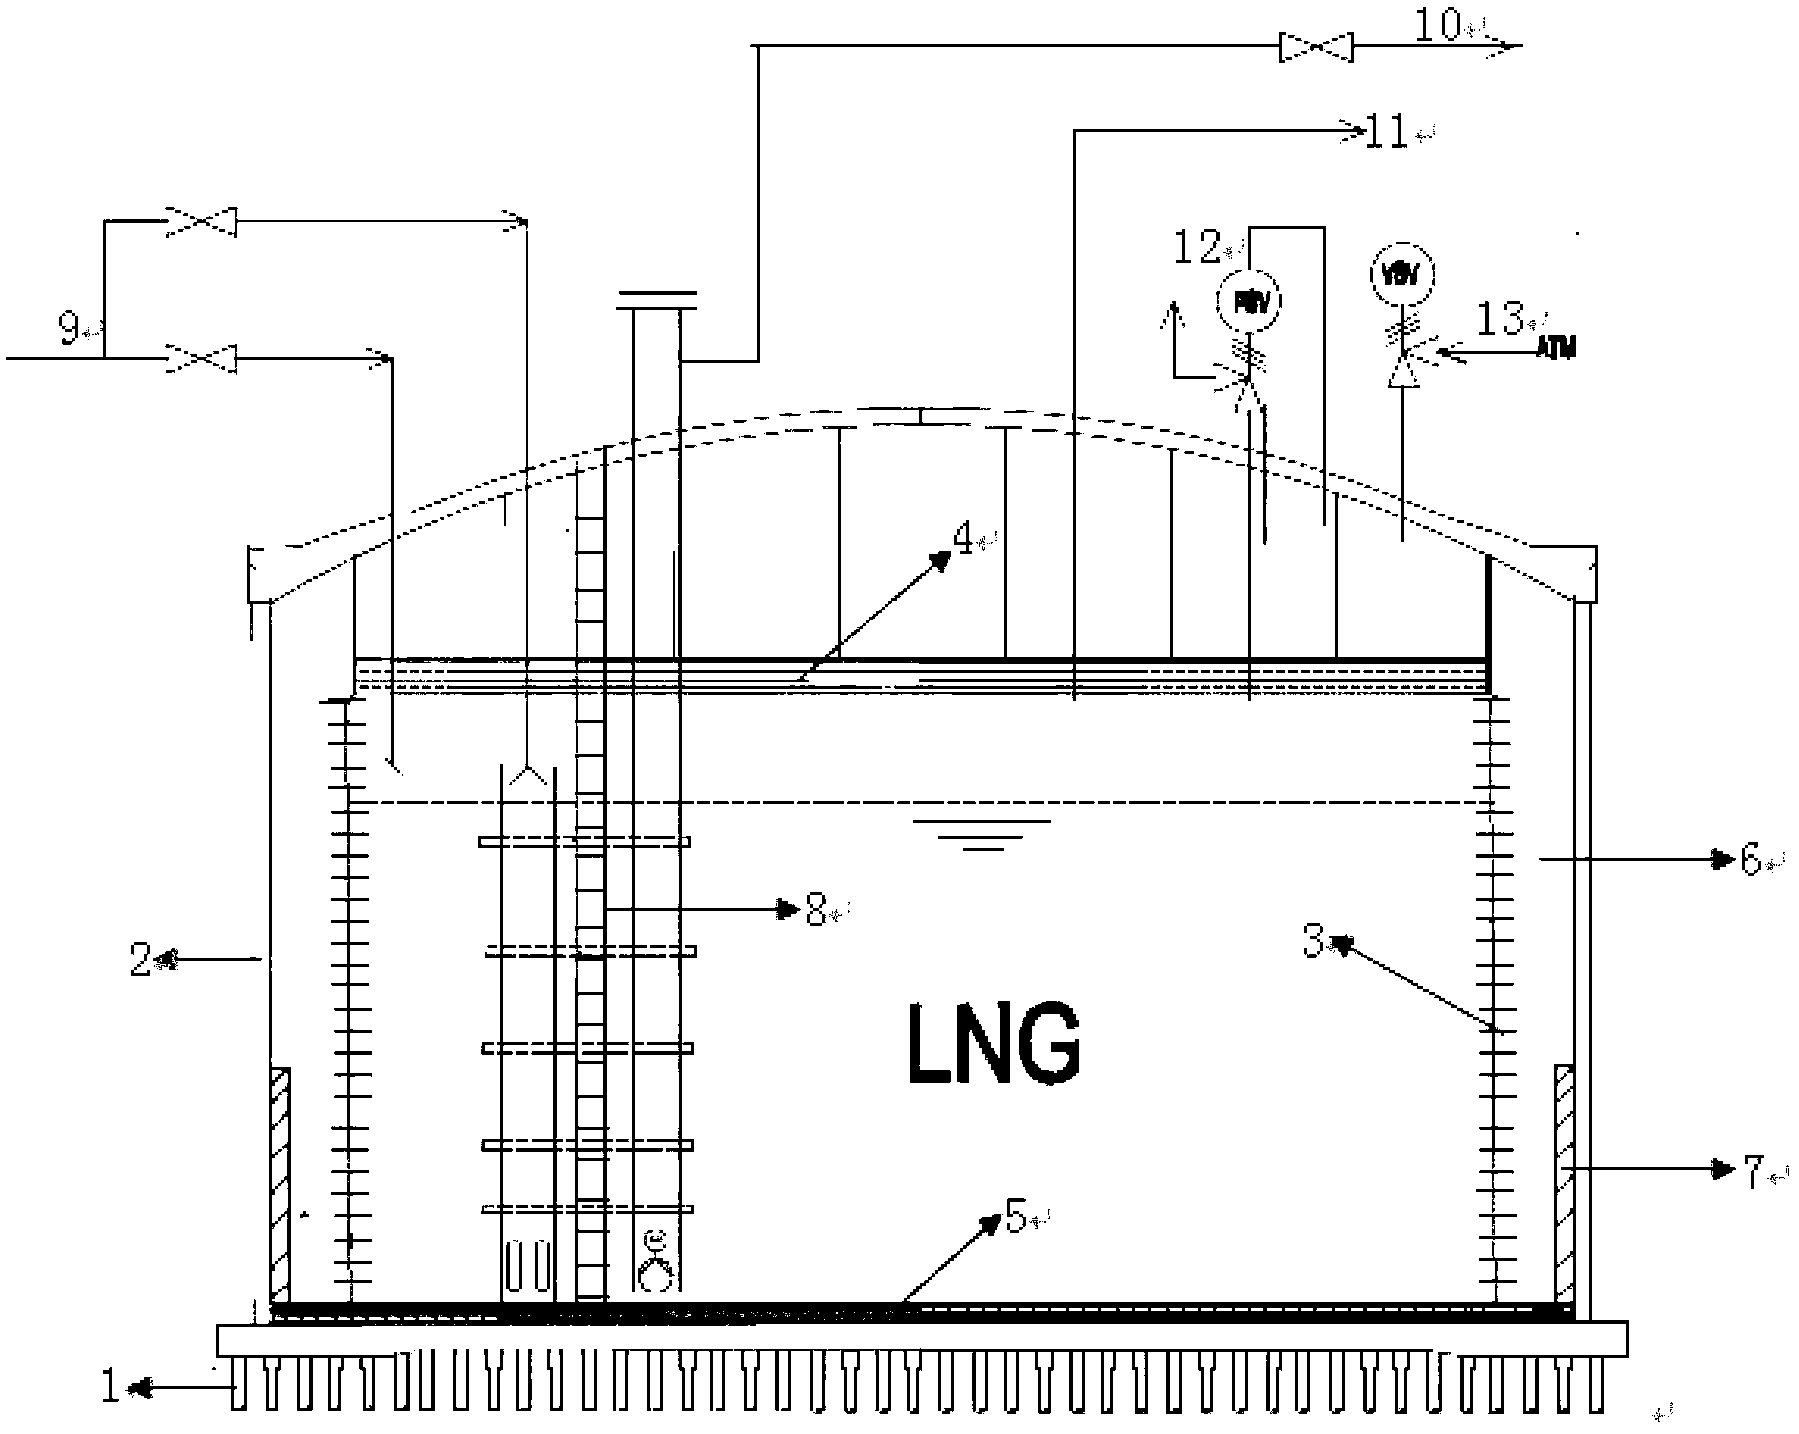 Self-supporting type LNG (Liquefied Natural Gas) storage tank